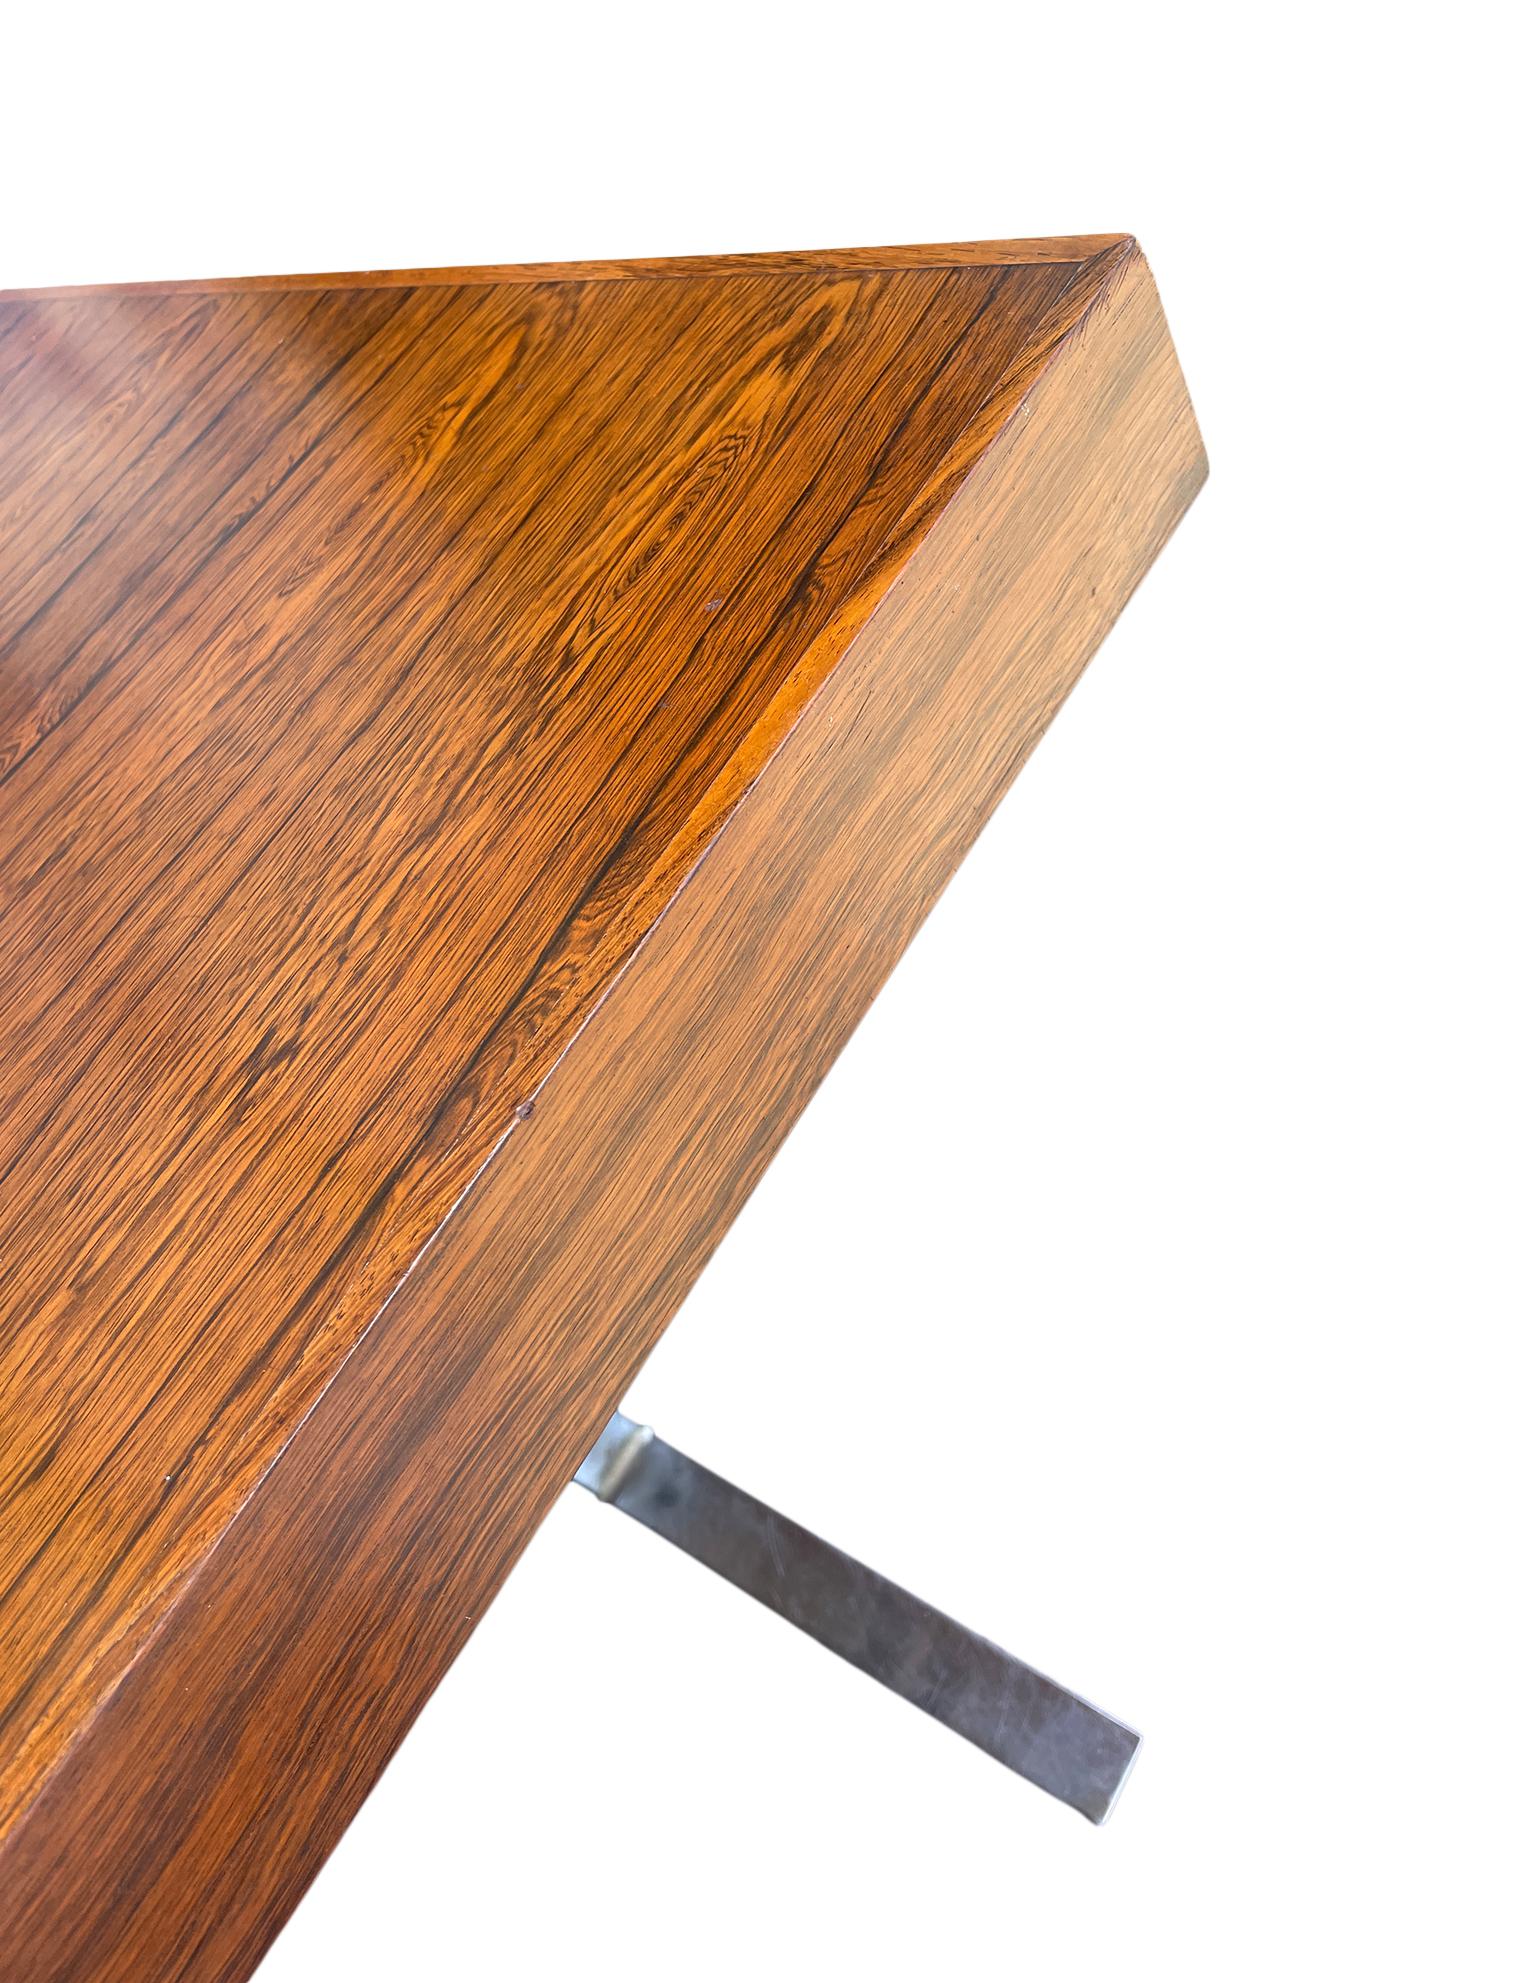 Stunning MidCentury Minimalist Rosewood Dining Table 1 Leaf by Georg Petersens For Sale 6